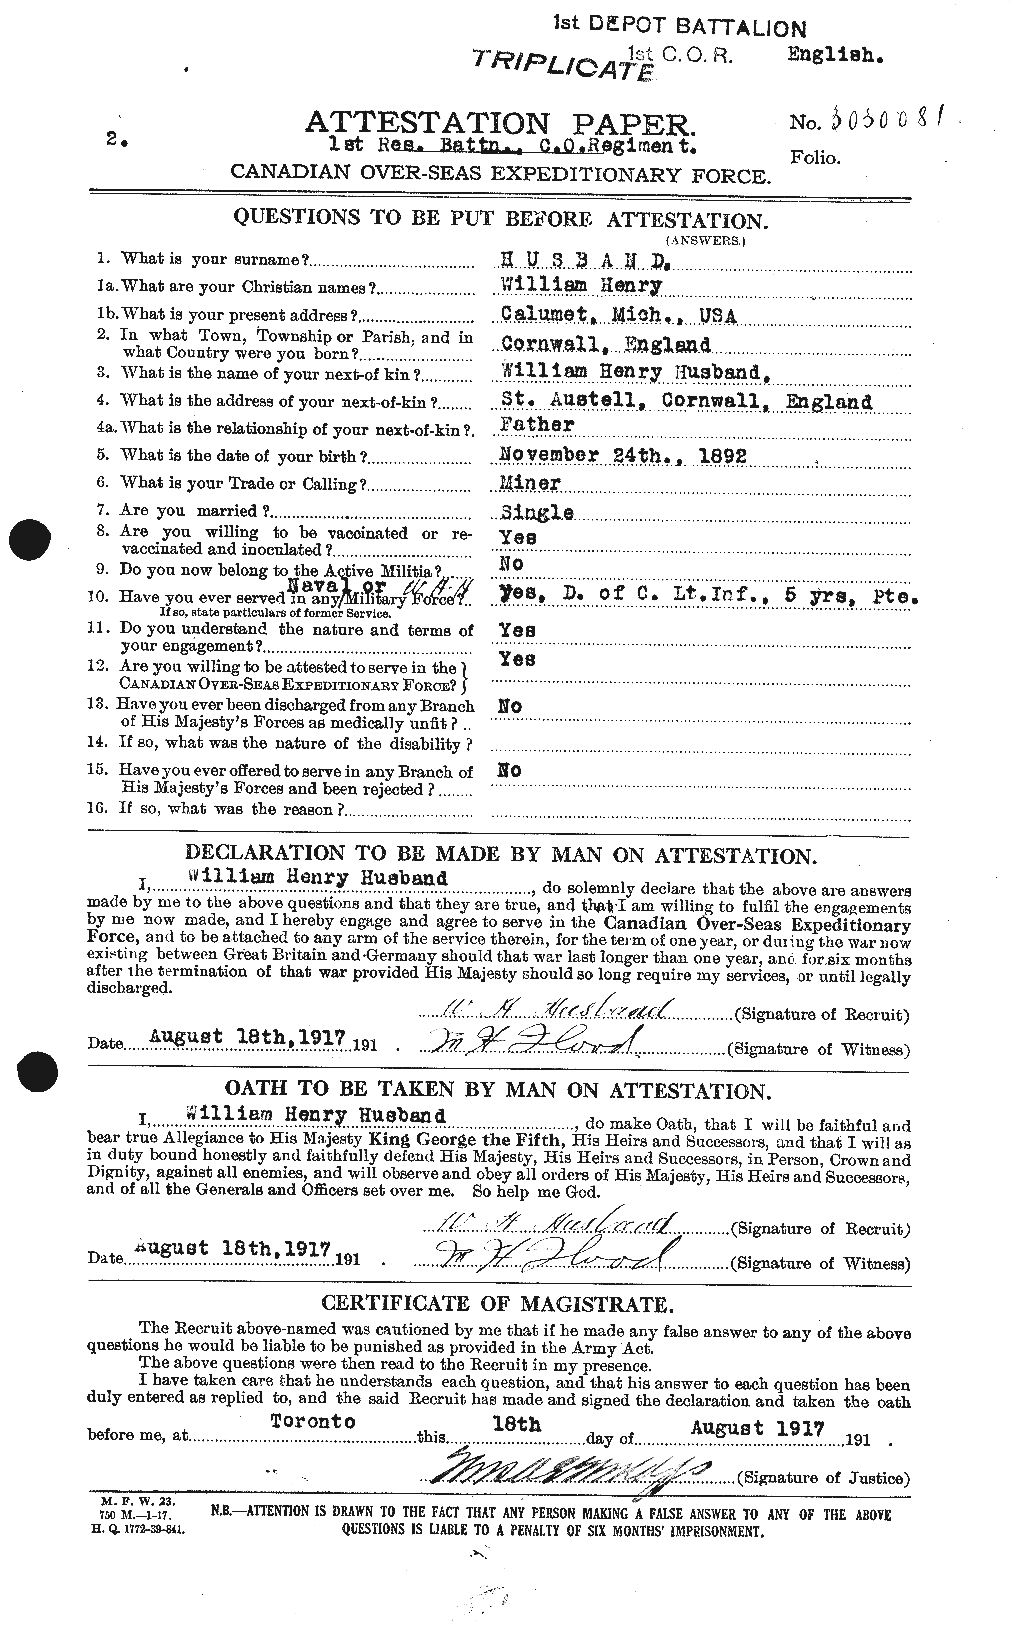 Personnel Records of the First World War - CEF 405255a